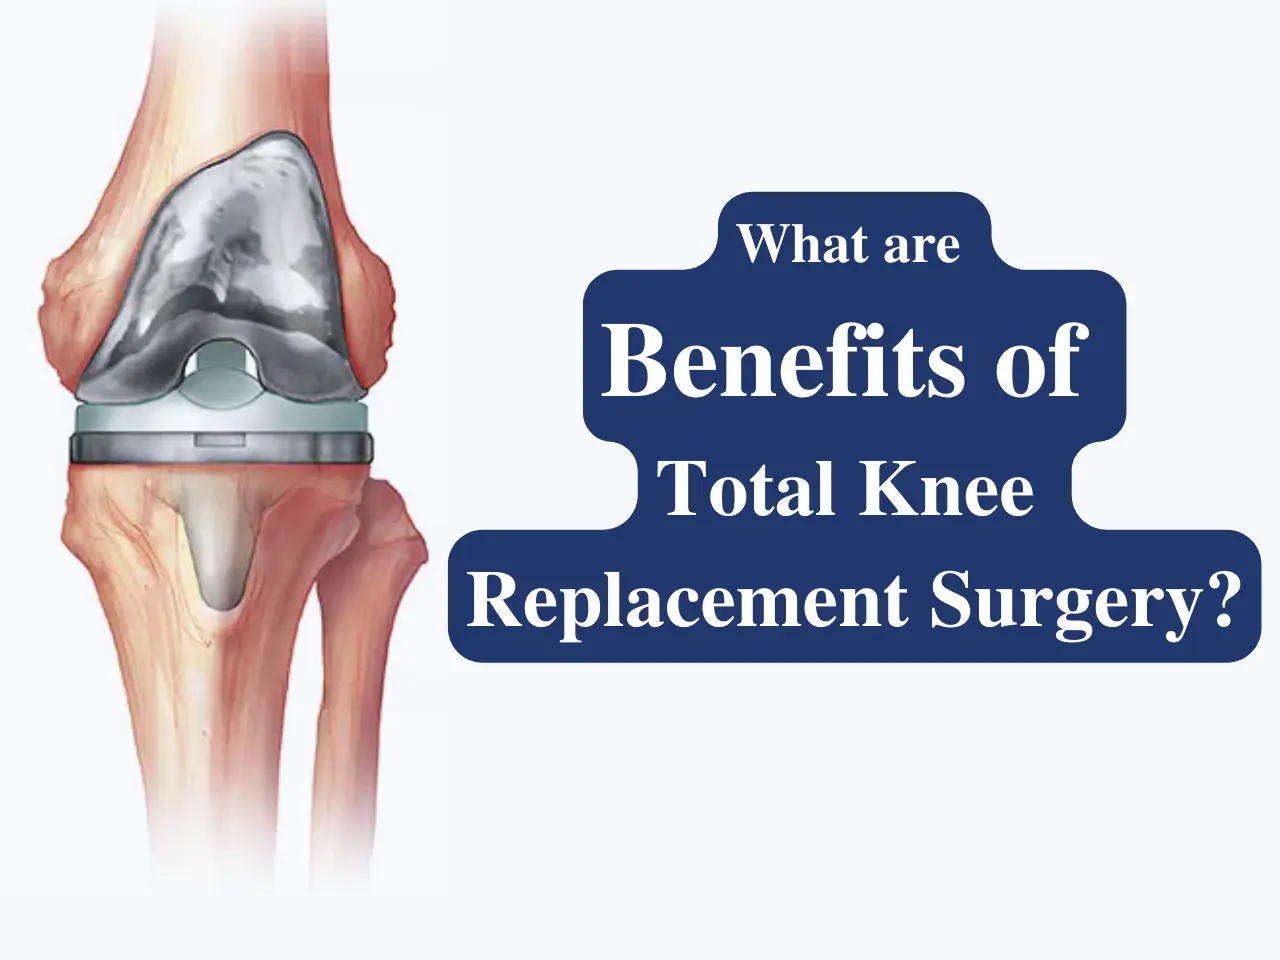 Benefits of Total Knee replacement